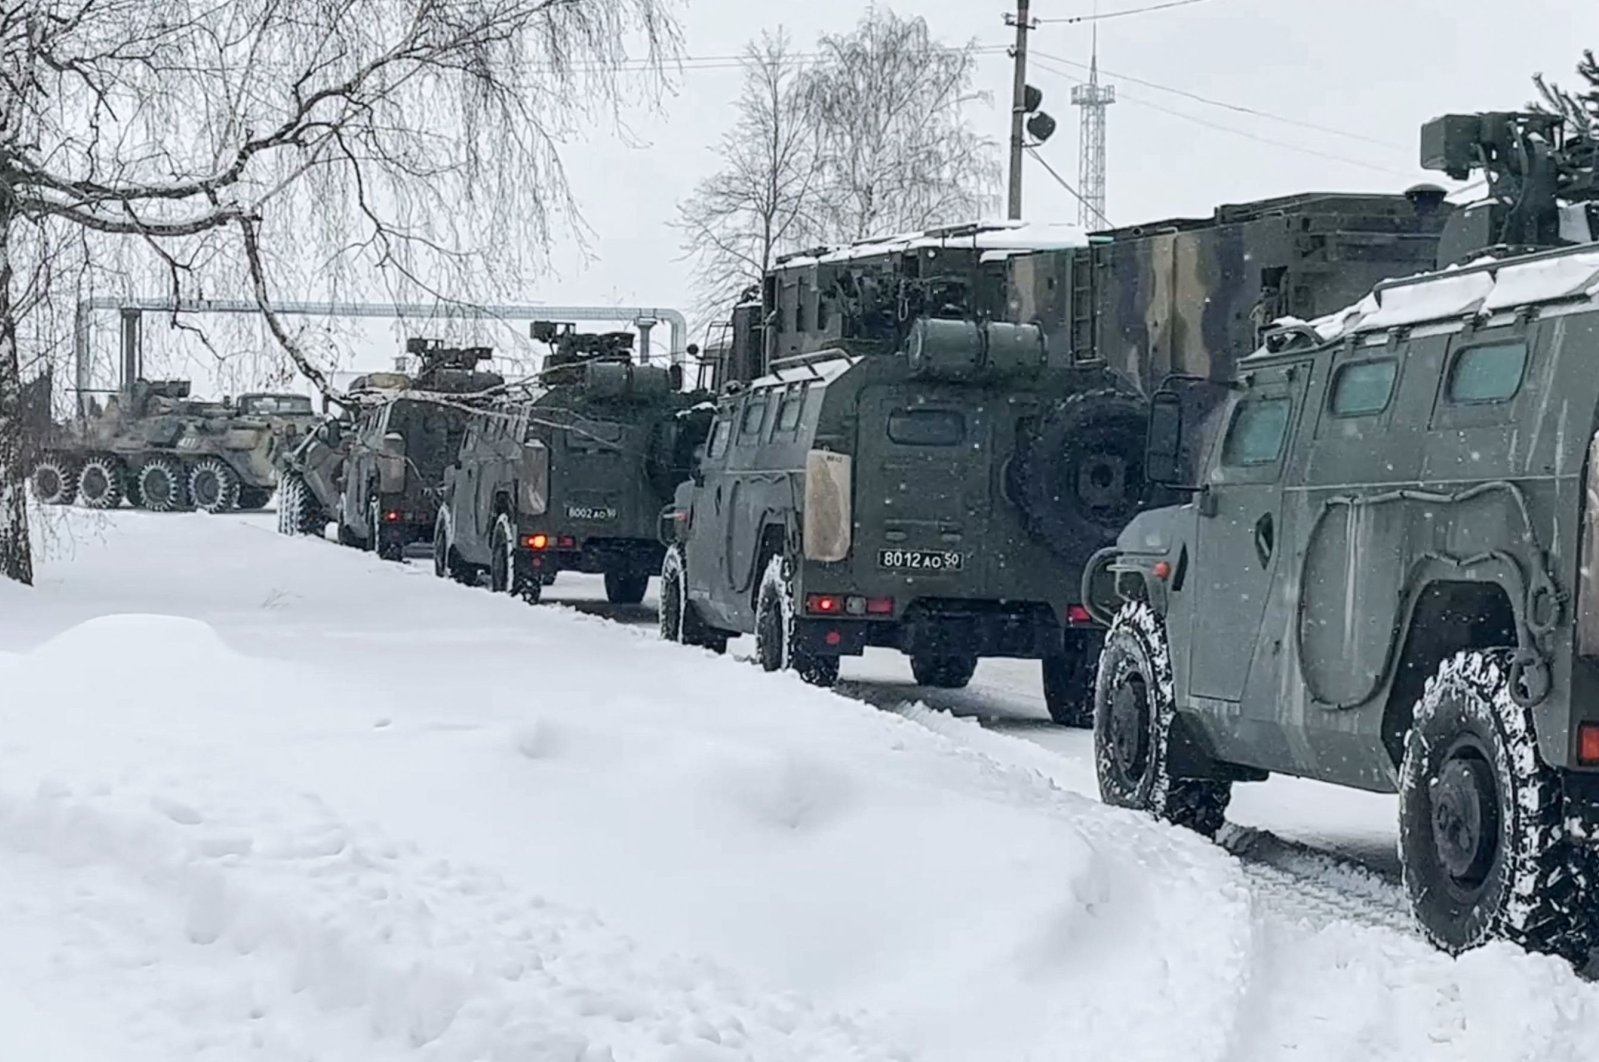 This handout image grab taken and released by the Russian Defense Ministry on Jan. 6, 2021, shows Russian military vehicles waiting to load a military cargo plane to depart to Kazakhstan as a peacekeeping force at the Chkalovsky airport, outside Moscow, Russia. (AFP Photo)